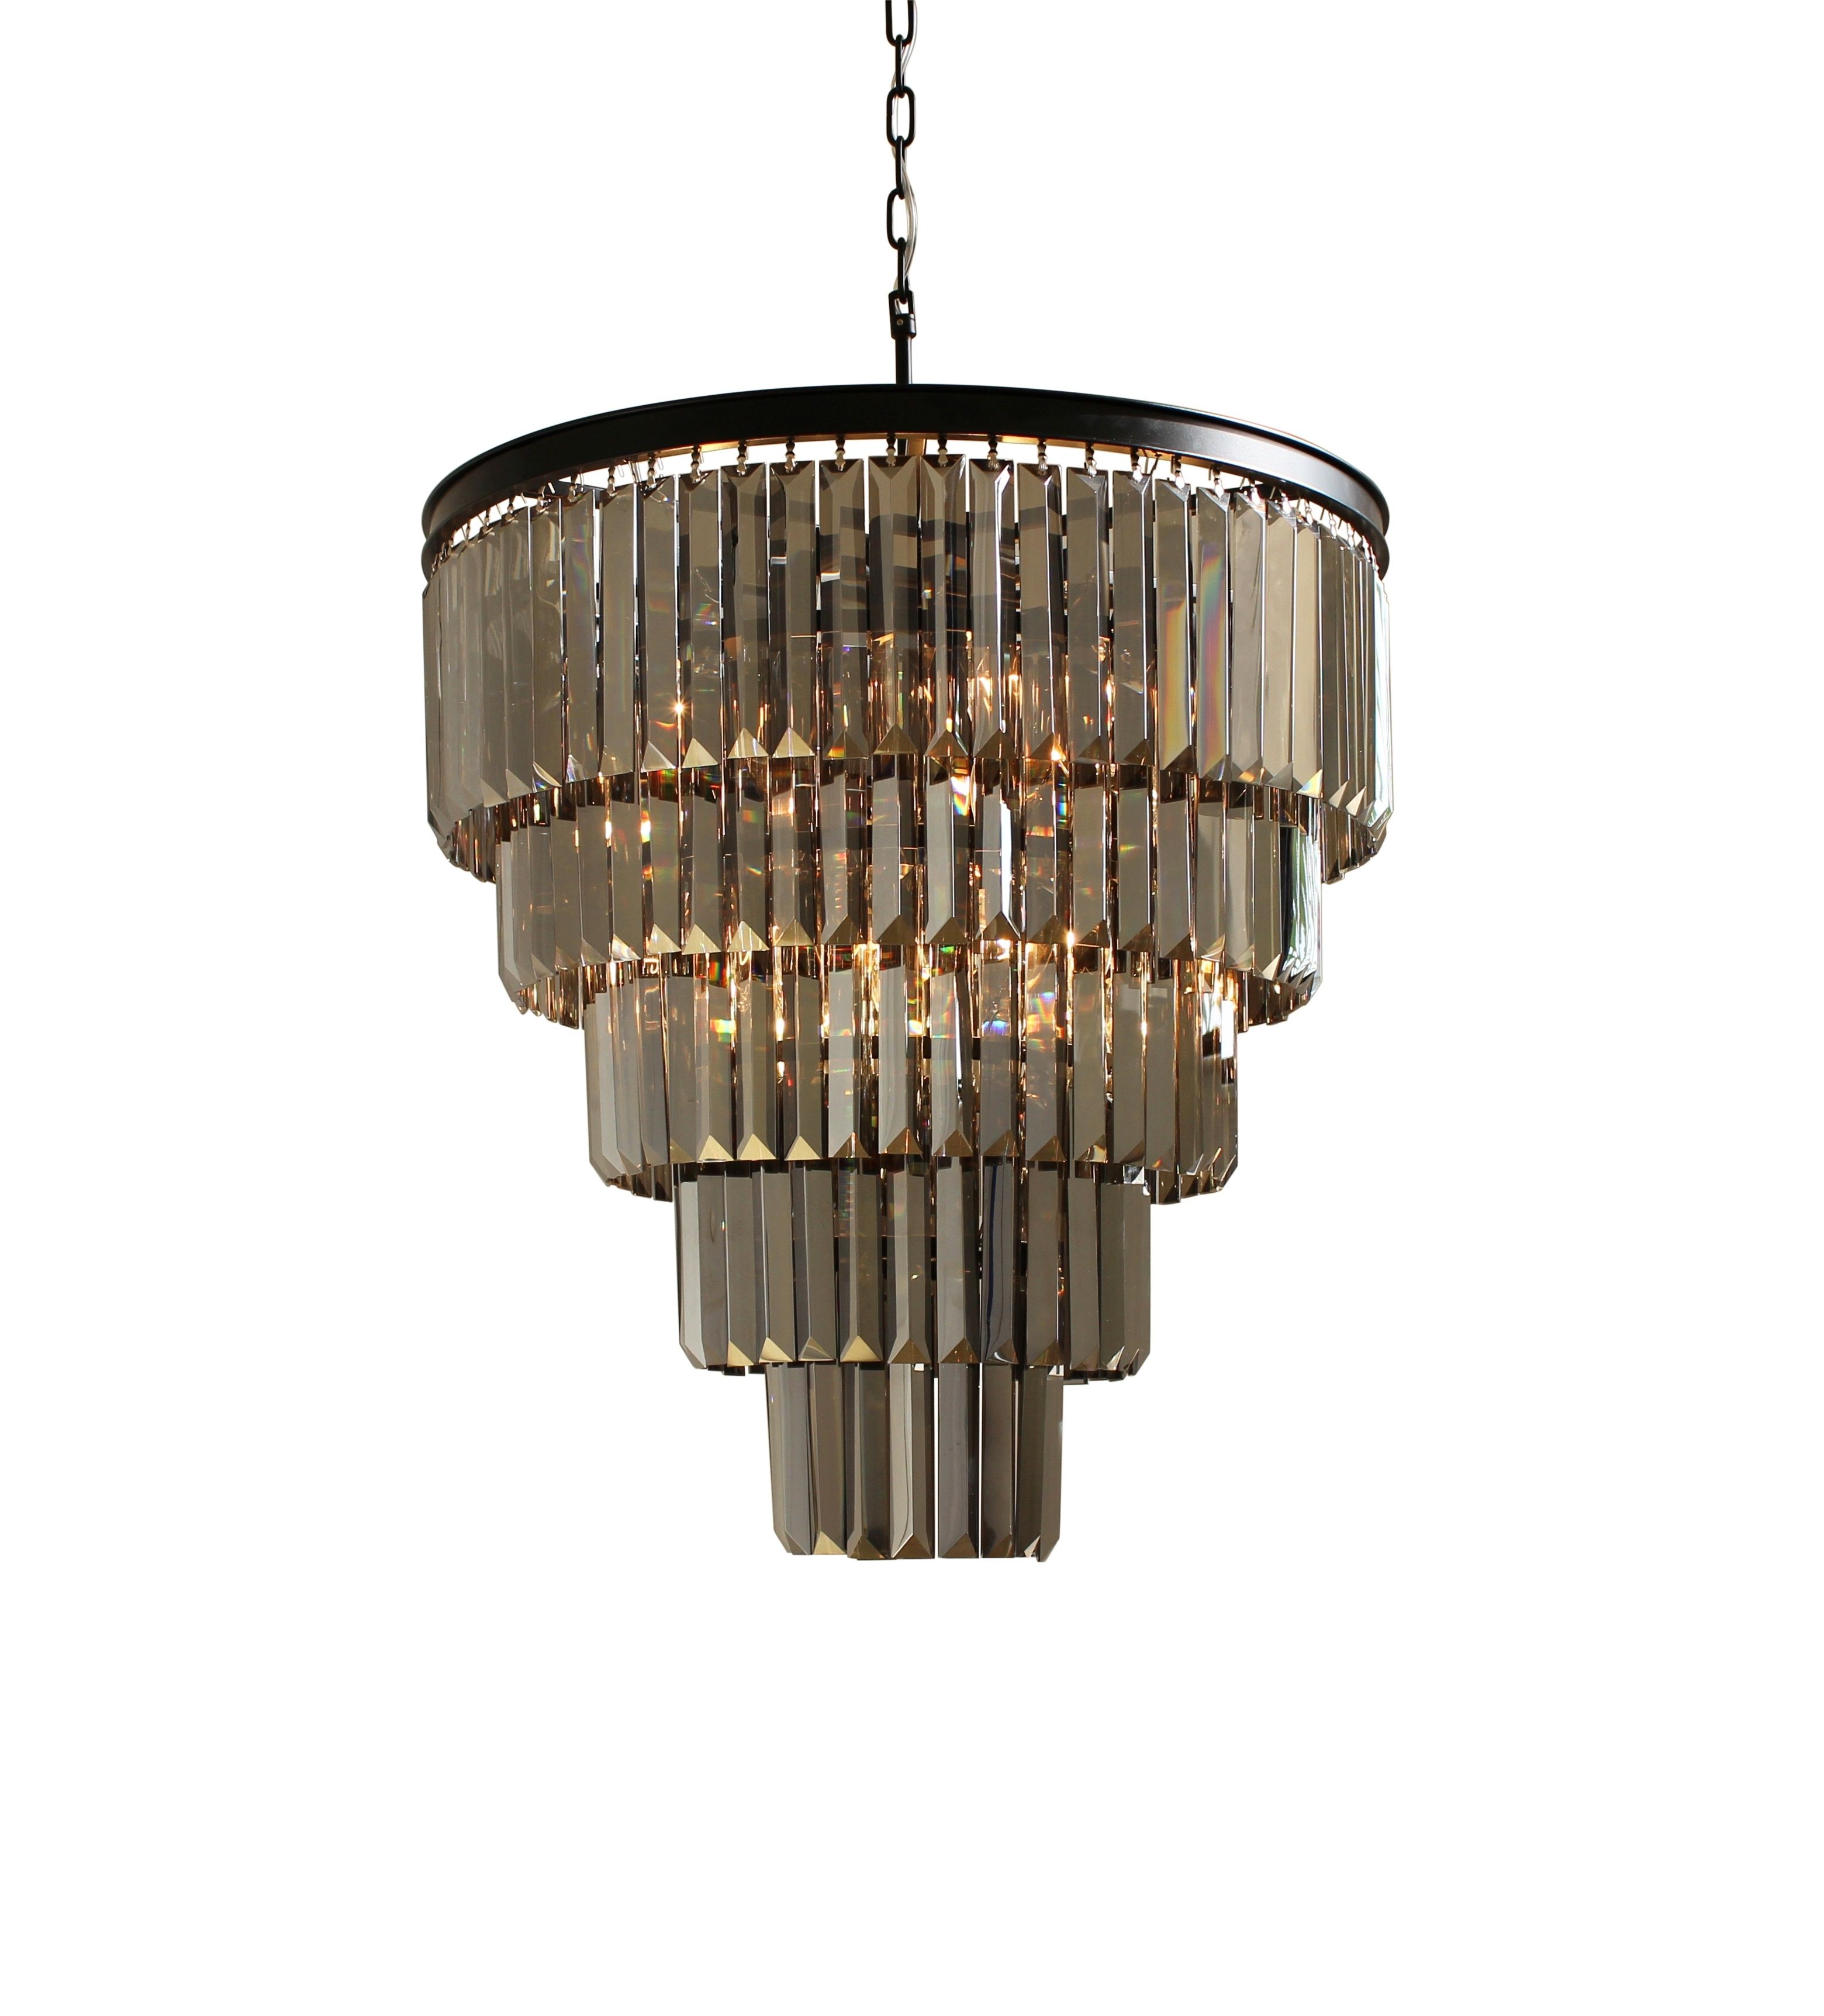 Dangelo 12 Light Round Smoked Glass Crystal Prism Chandelier Throughout Smoked Glass Chandelier (View 8 of 15)